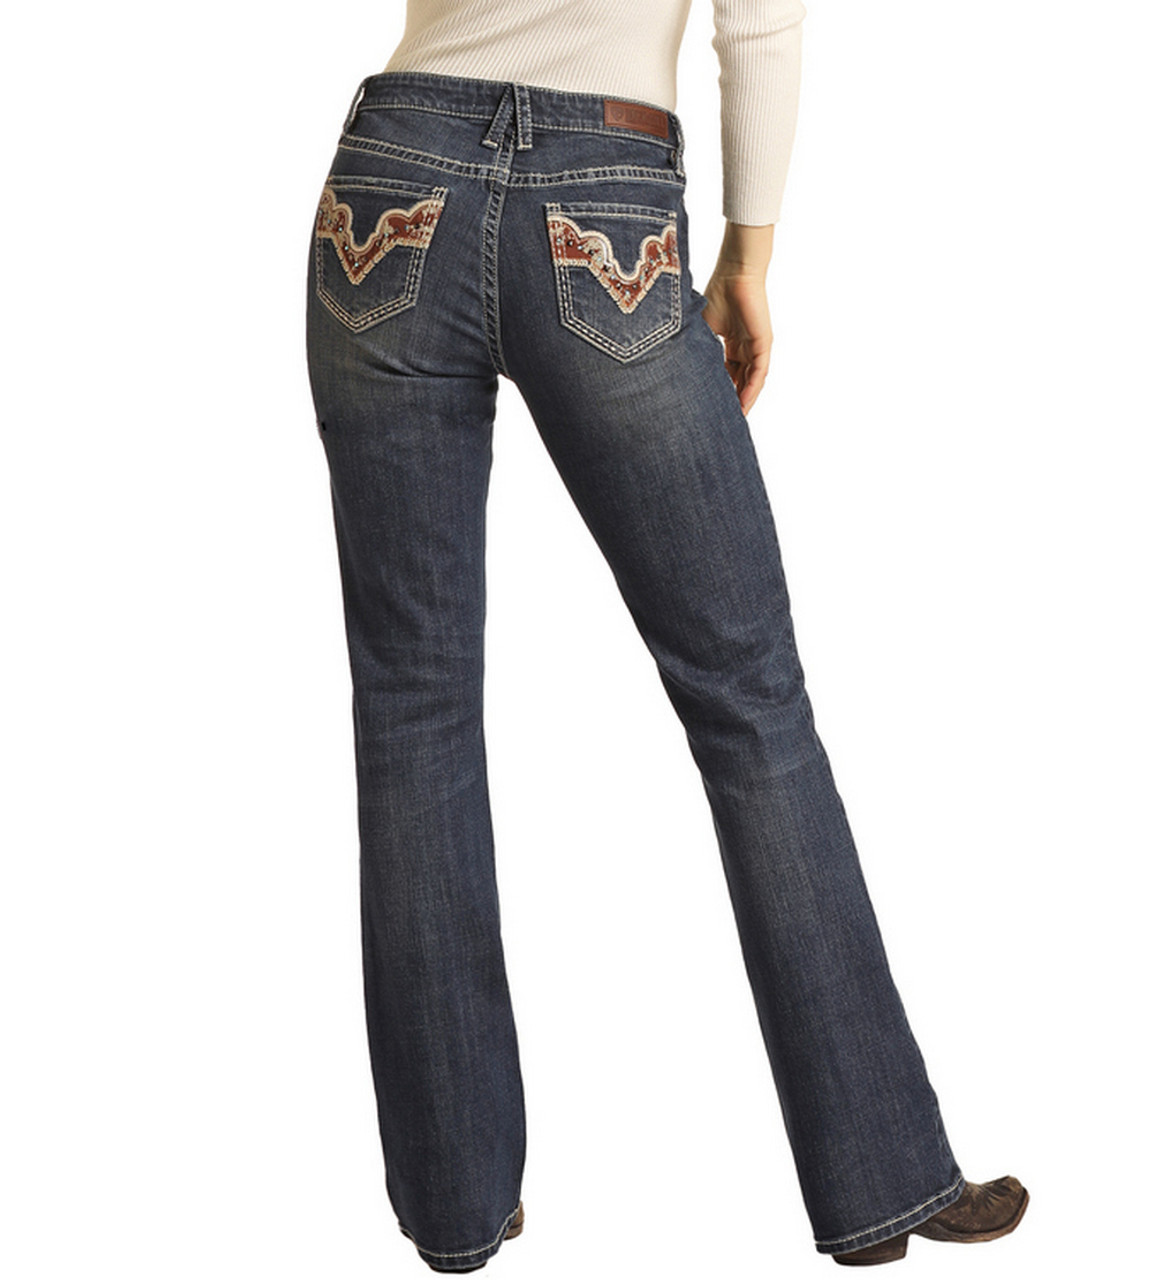 Product Name: Rock & Roll Denim Women's High Rise Star Back Flare Jeans